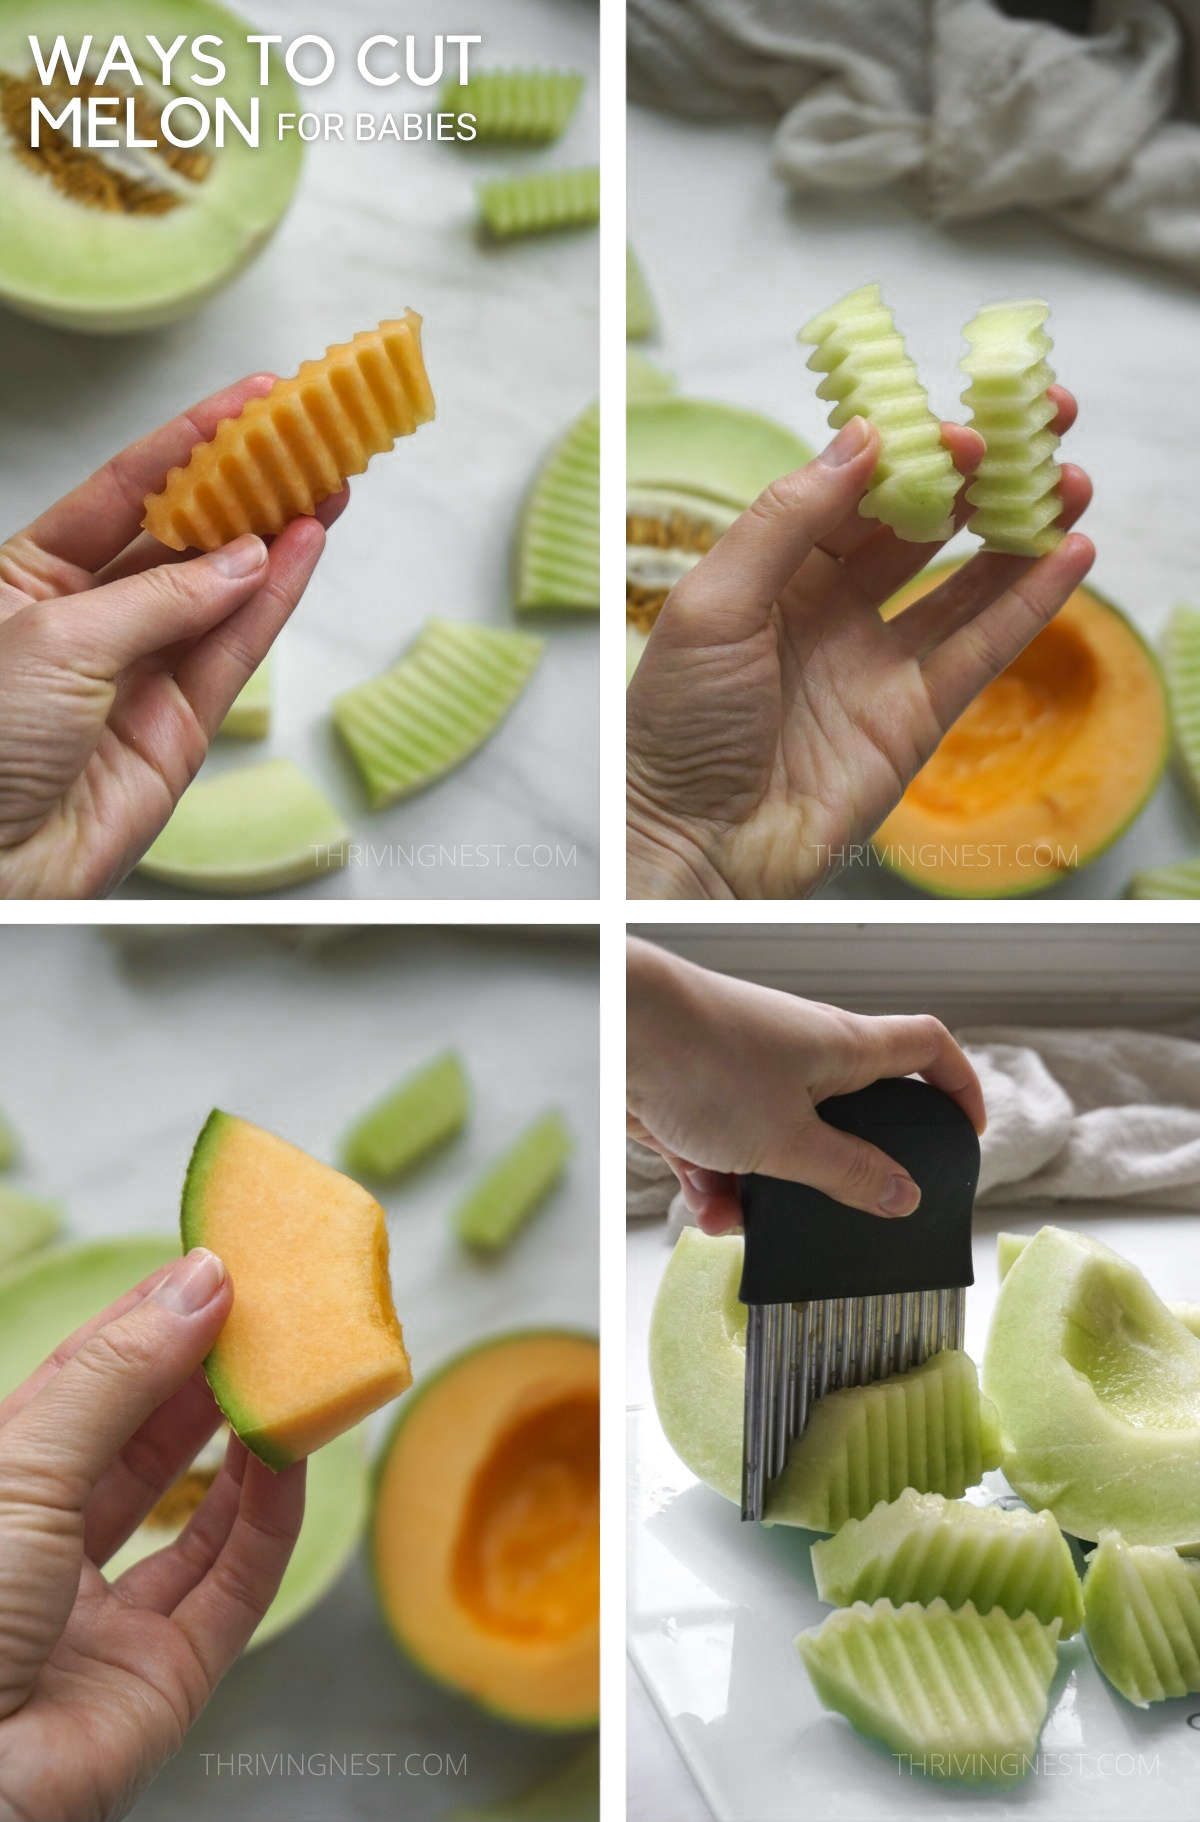 Ways to cut honeydew and cantaloupe melon for babies. Crinkle cutting the melon with wavy edges, add grip to slippery melon. Serving melon to babies.